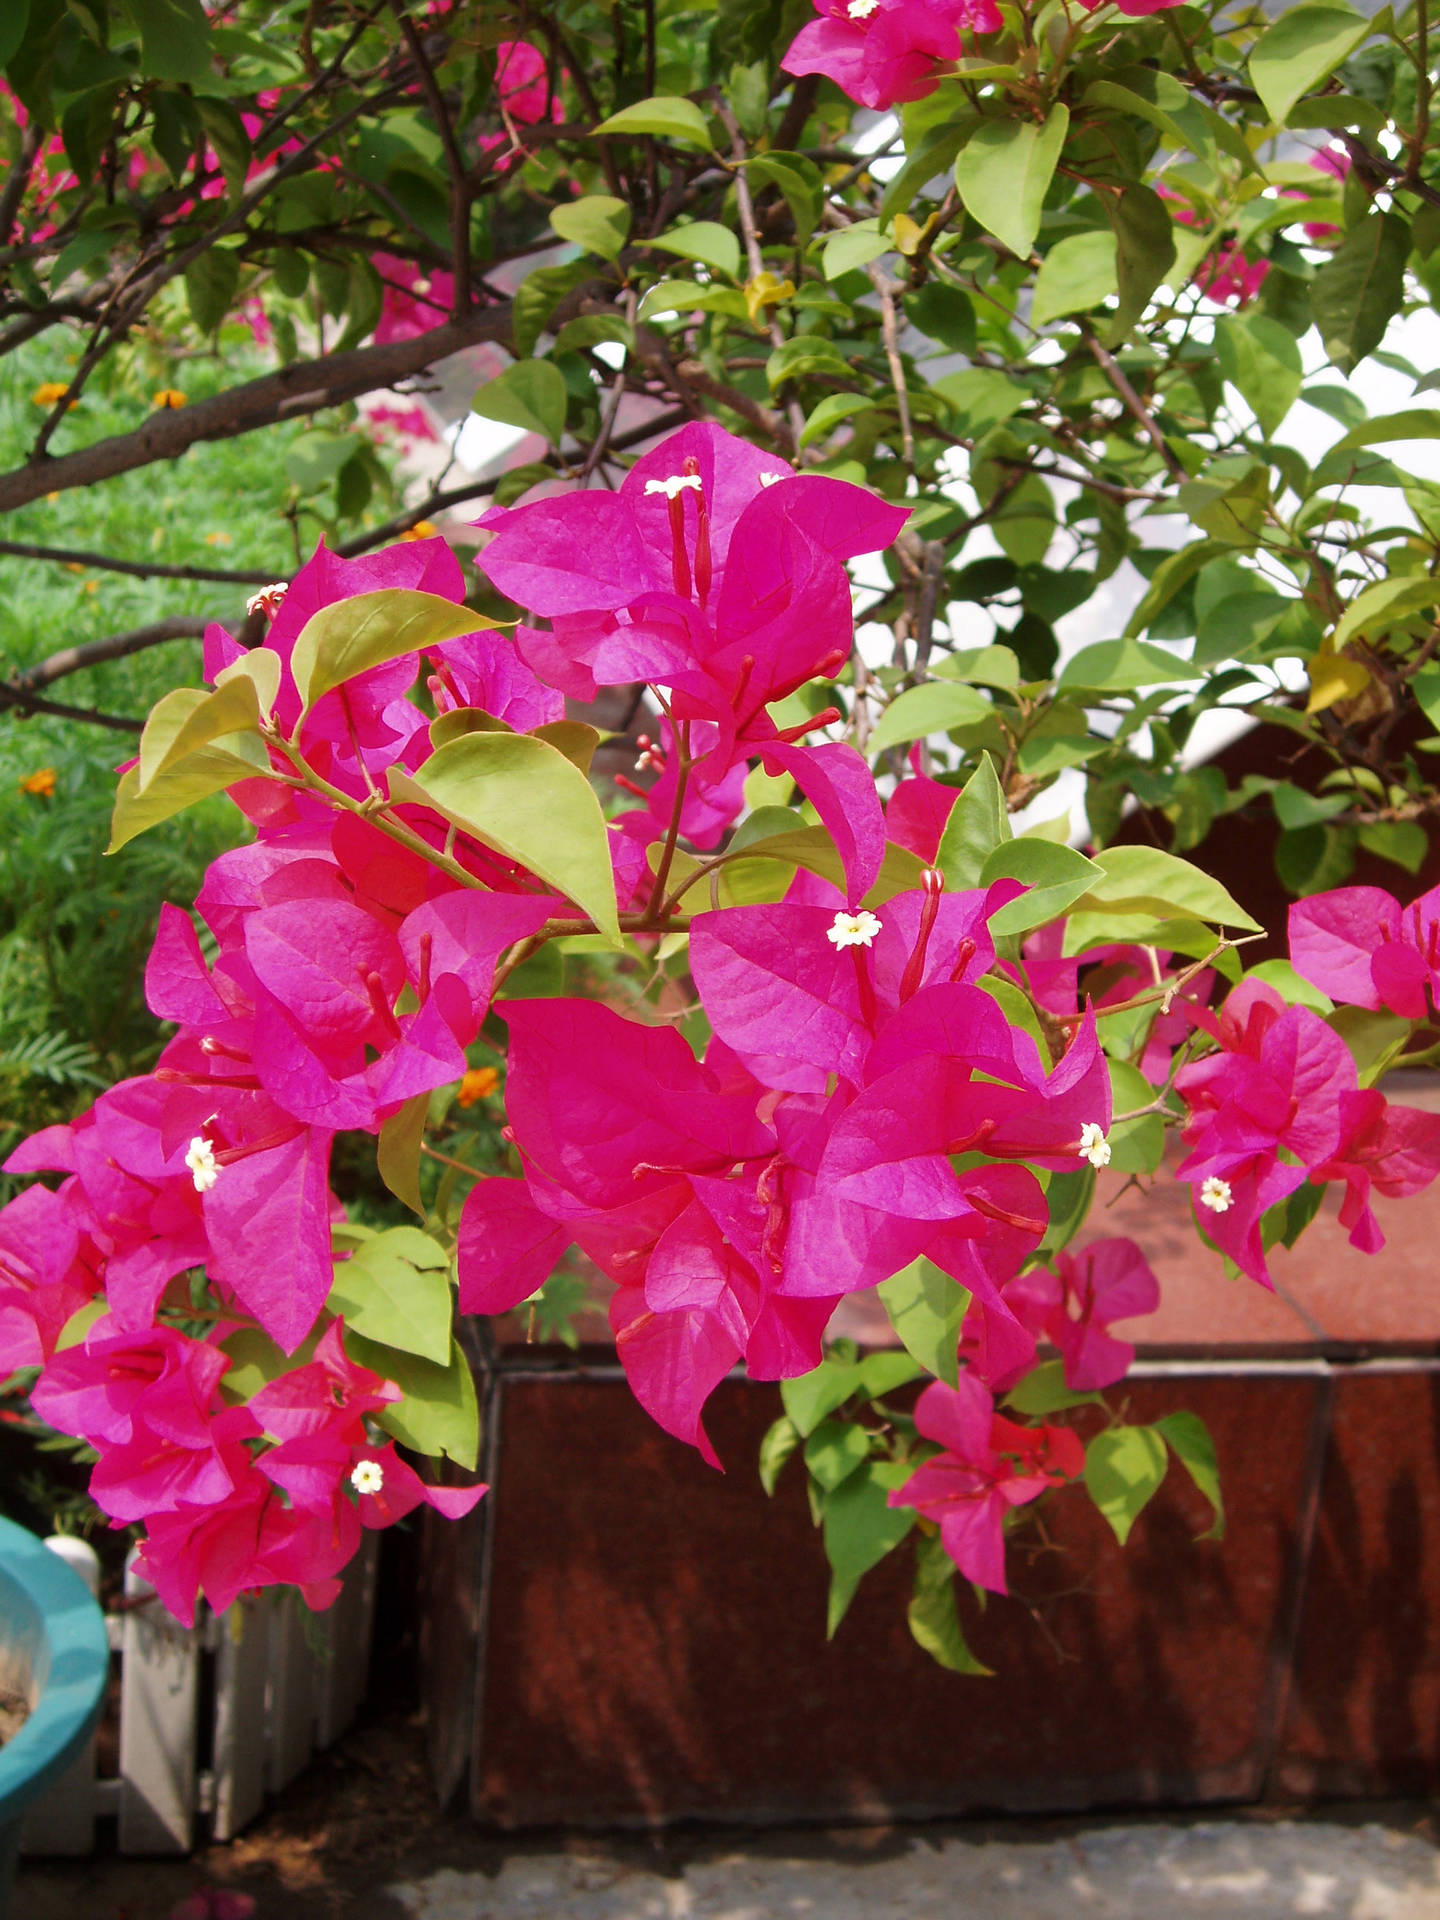 "a Vibrant Explosion Of Pink Bougainvillea In Full Bloom." Wallpaper